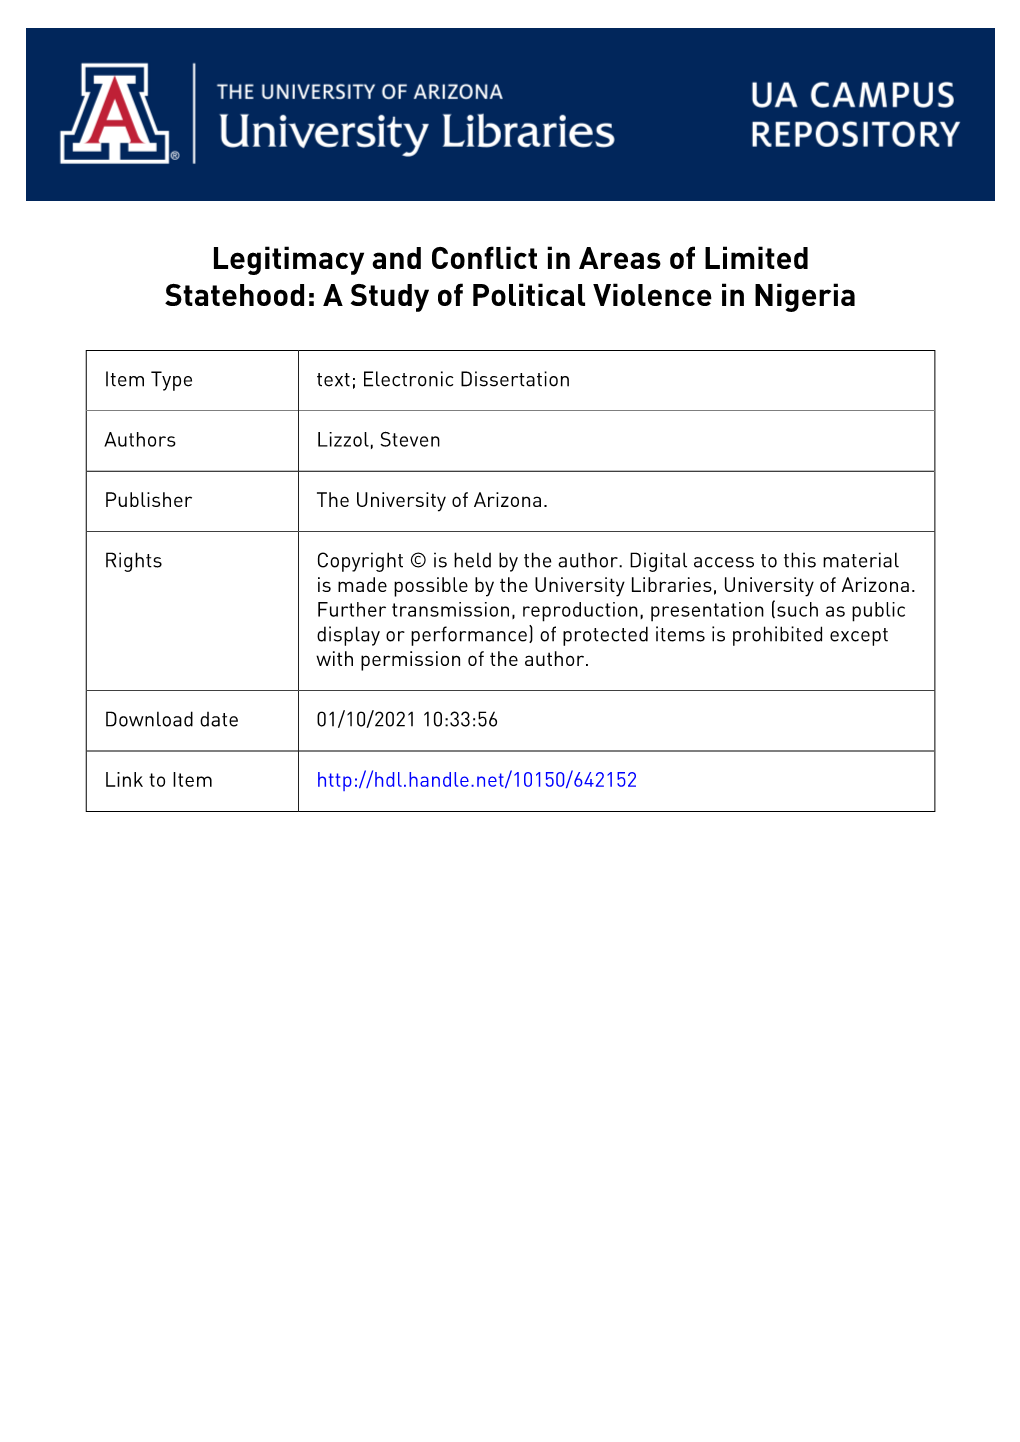 LEGITIMACY and CONFLICT in AREAS of LIMITED STATEHOOD: a STUDY of POLITICAL VIOLENCE in NIGERIA by Steven M. Lizzol ___